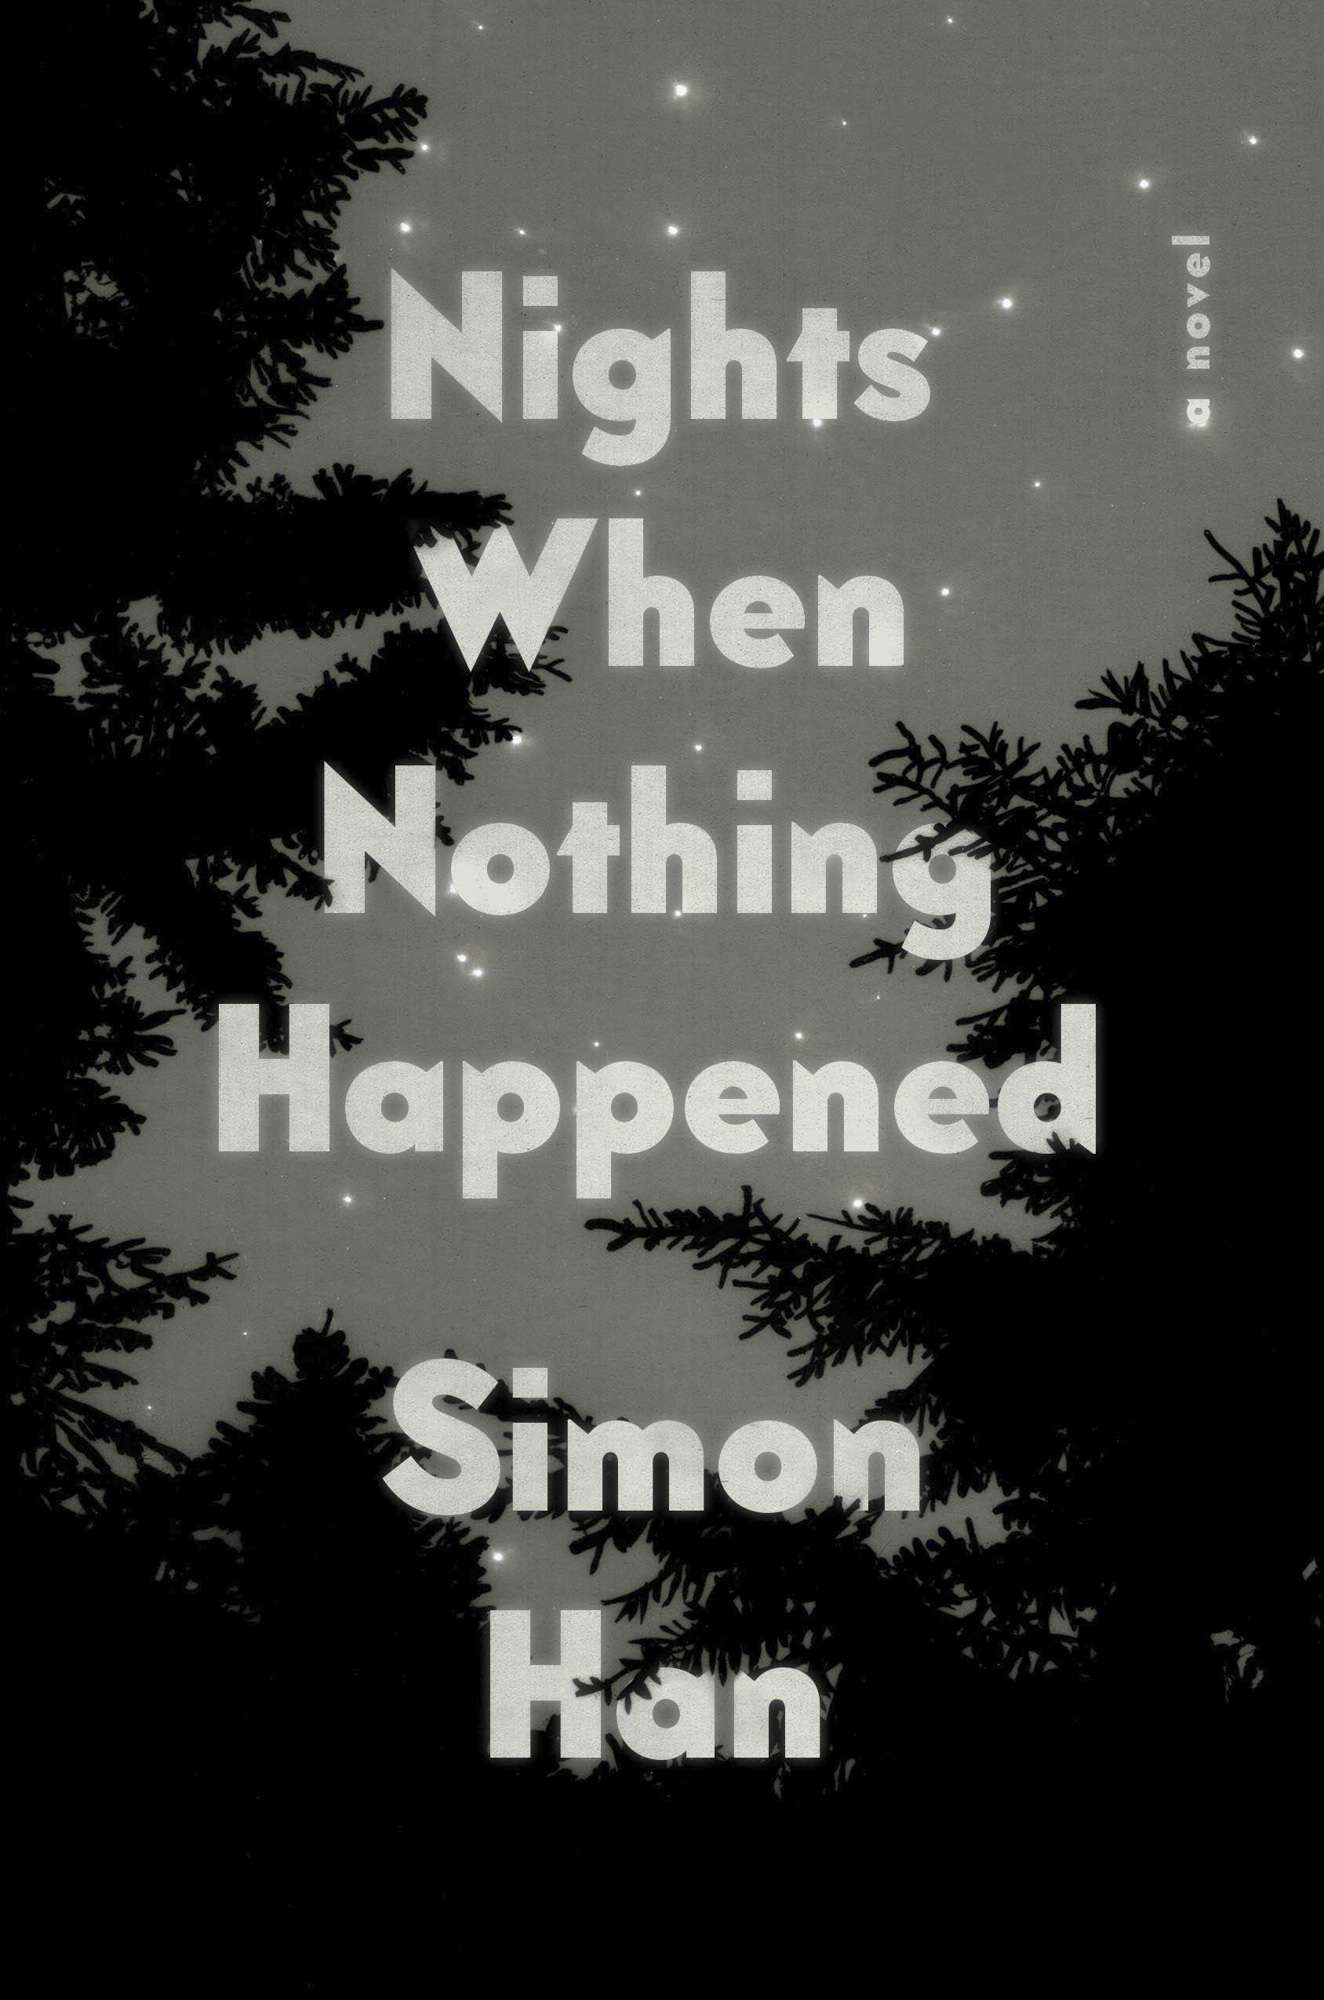 Nights When Nothing Happened by Simon Han